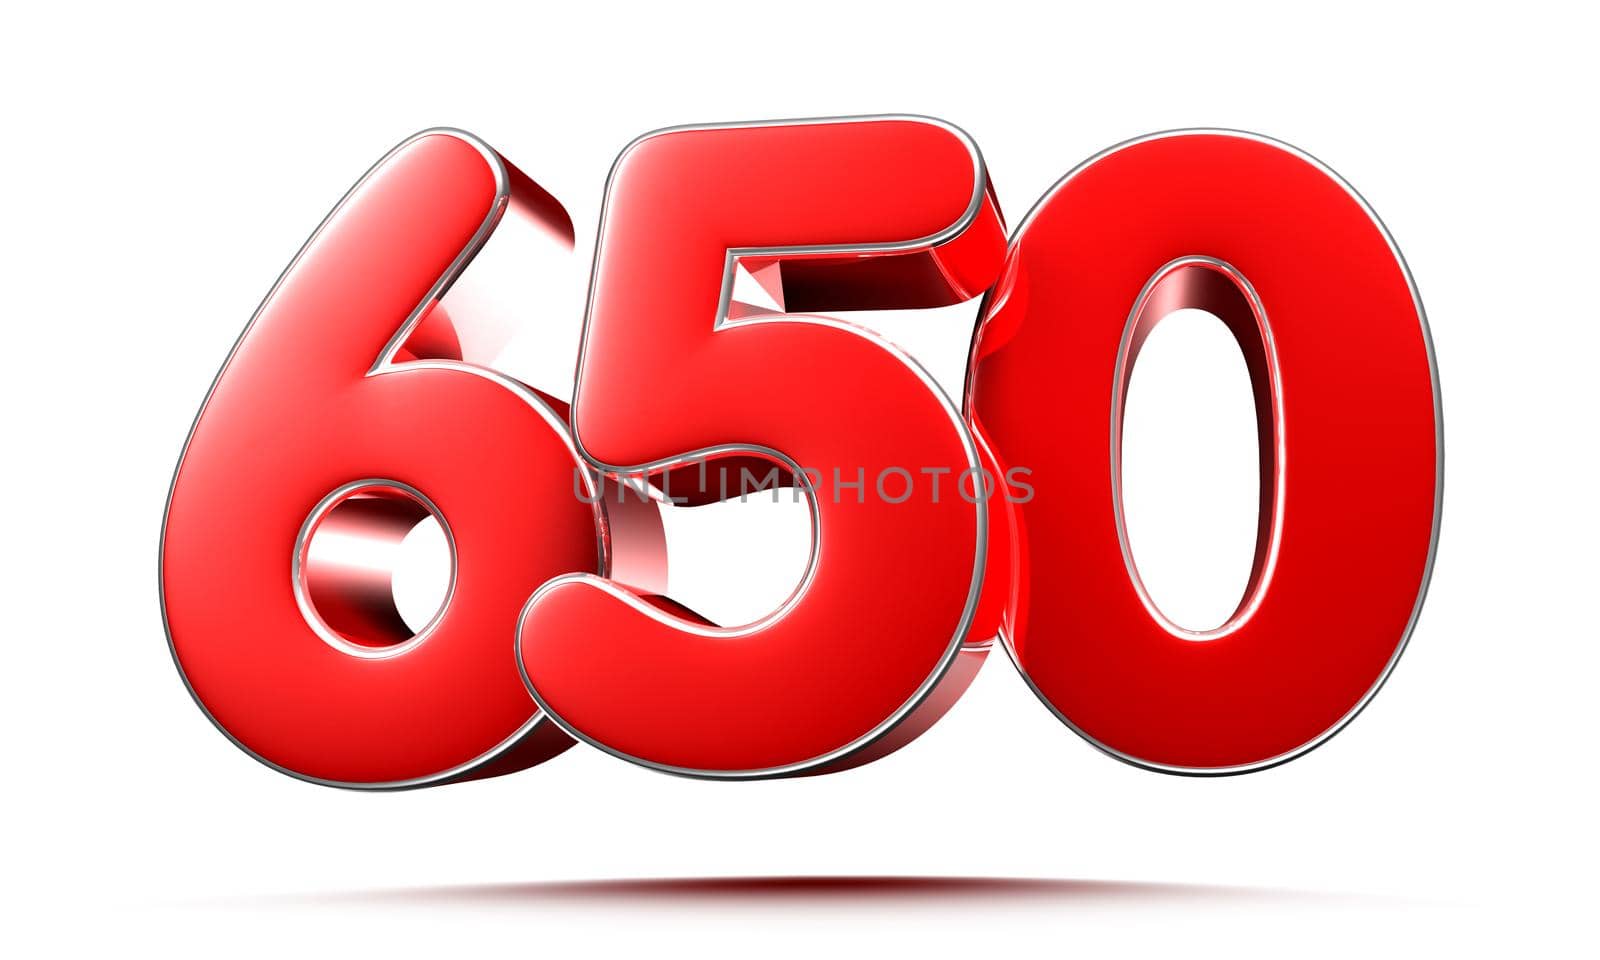 Rounded red numbers 650 on white background 3D illustration with clipping path by thitimontoyai